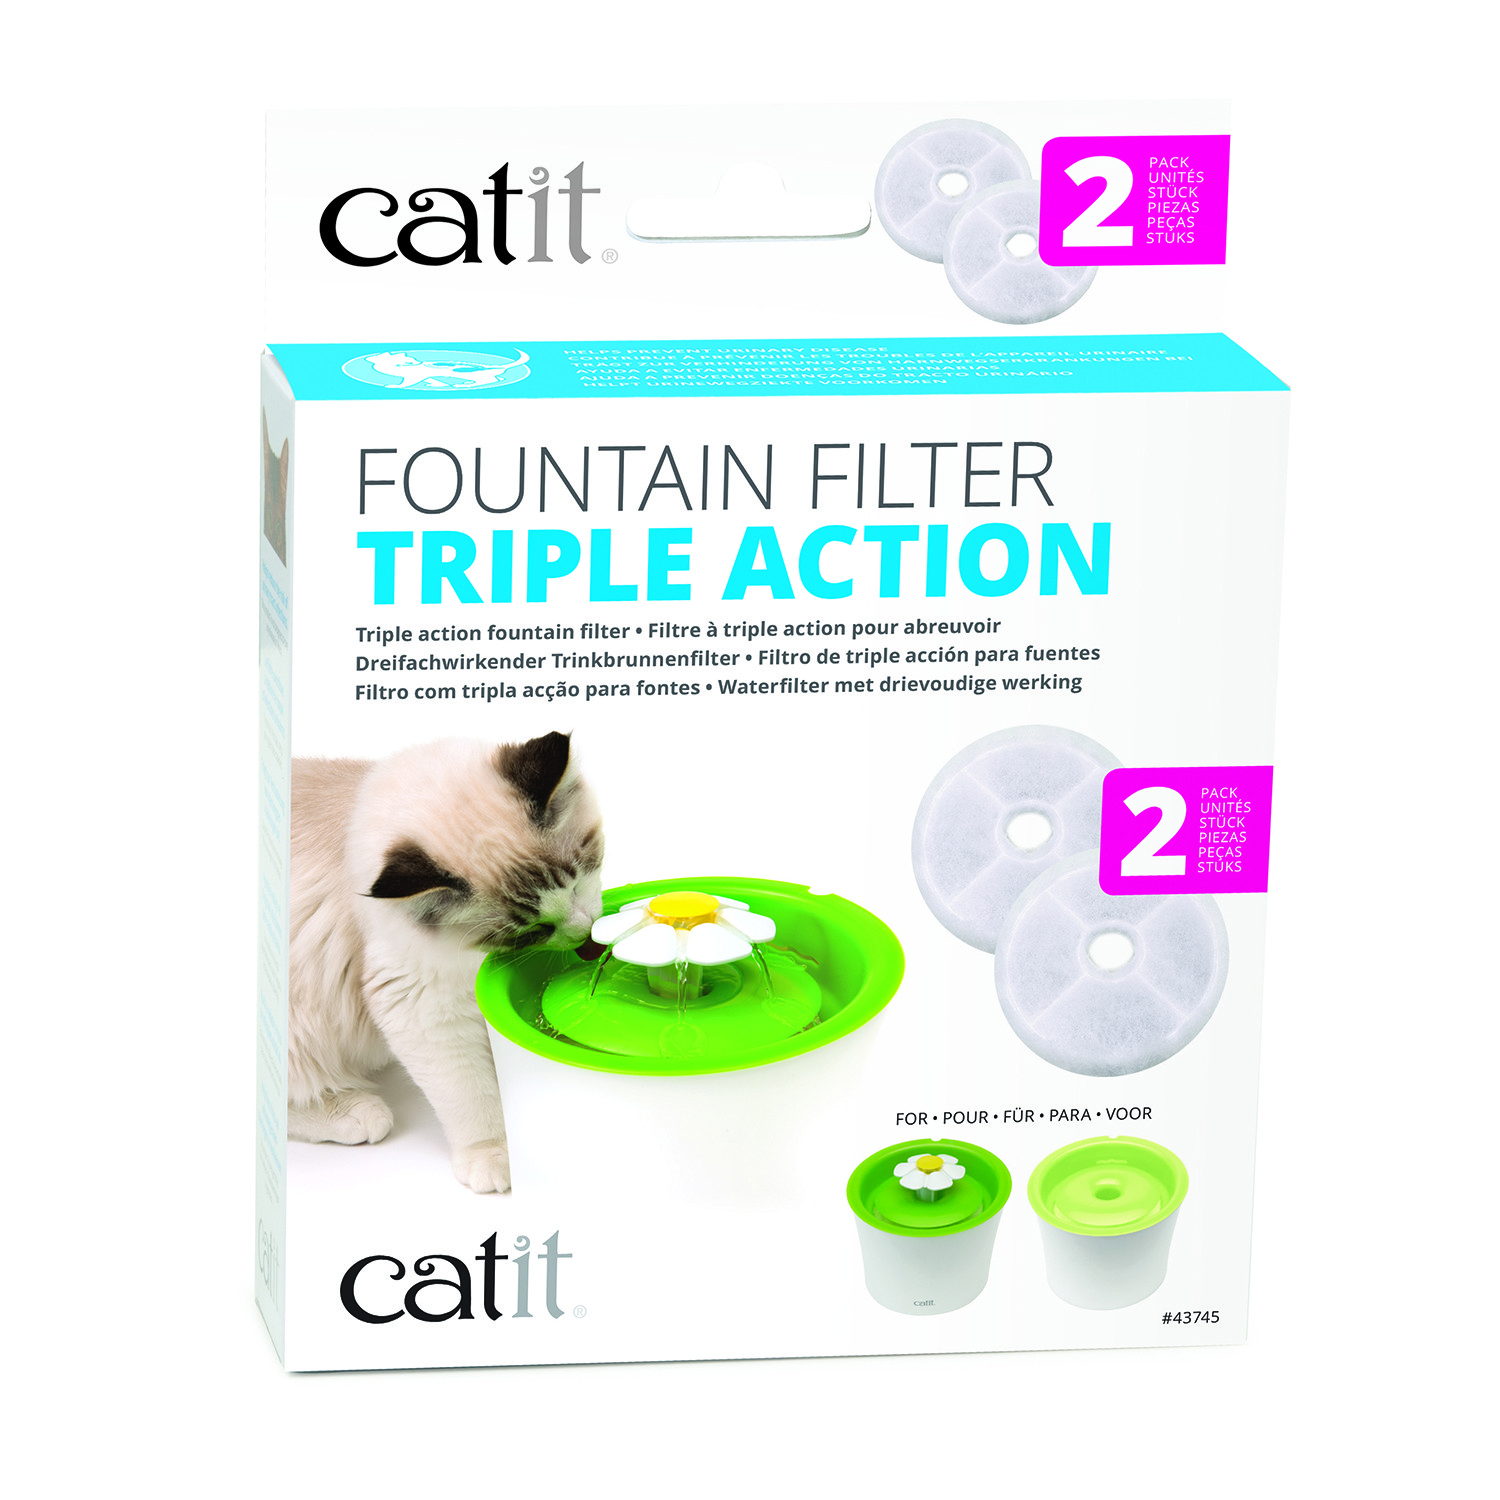 Pack of 2 Catit Triple Action Fountain Filters Image 1